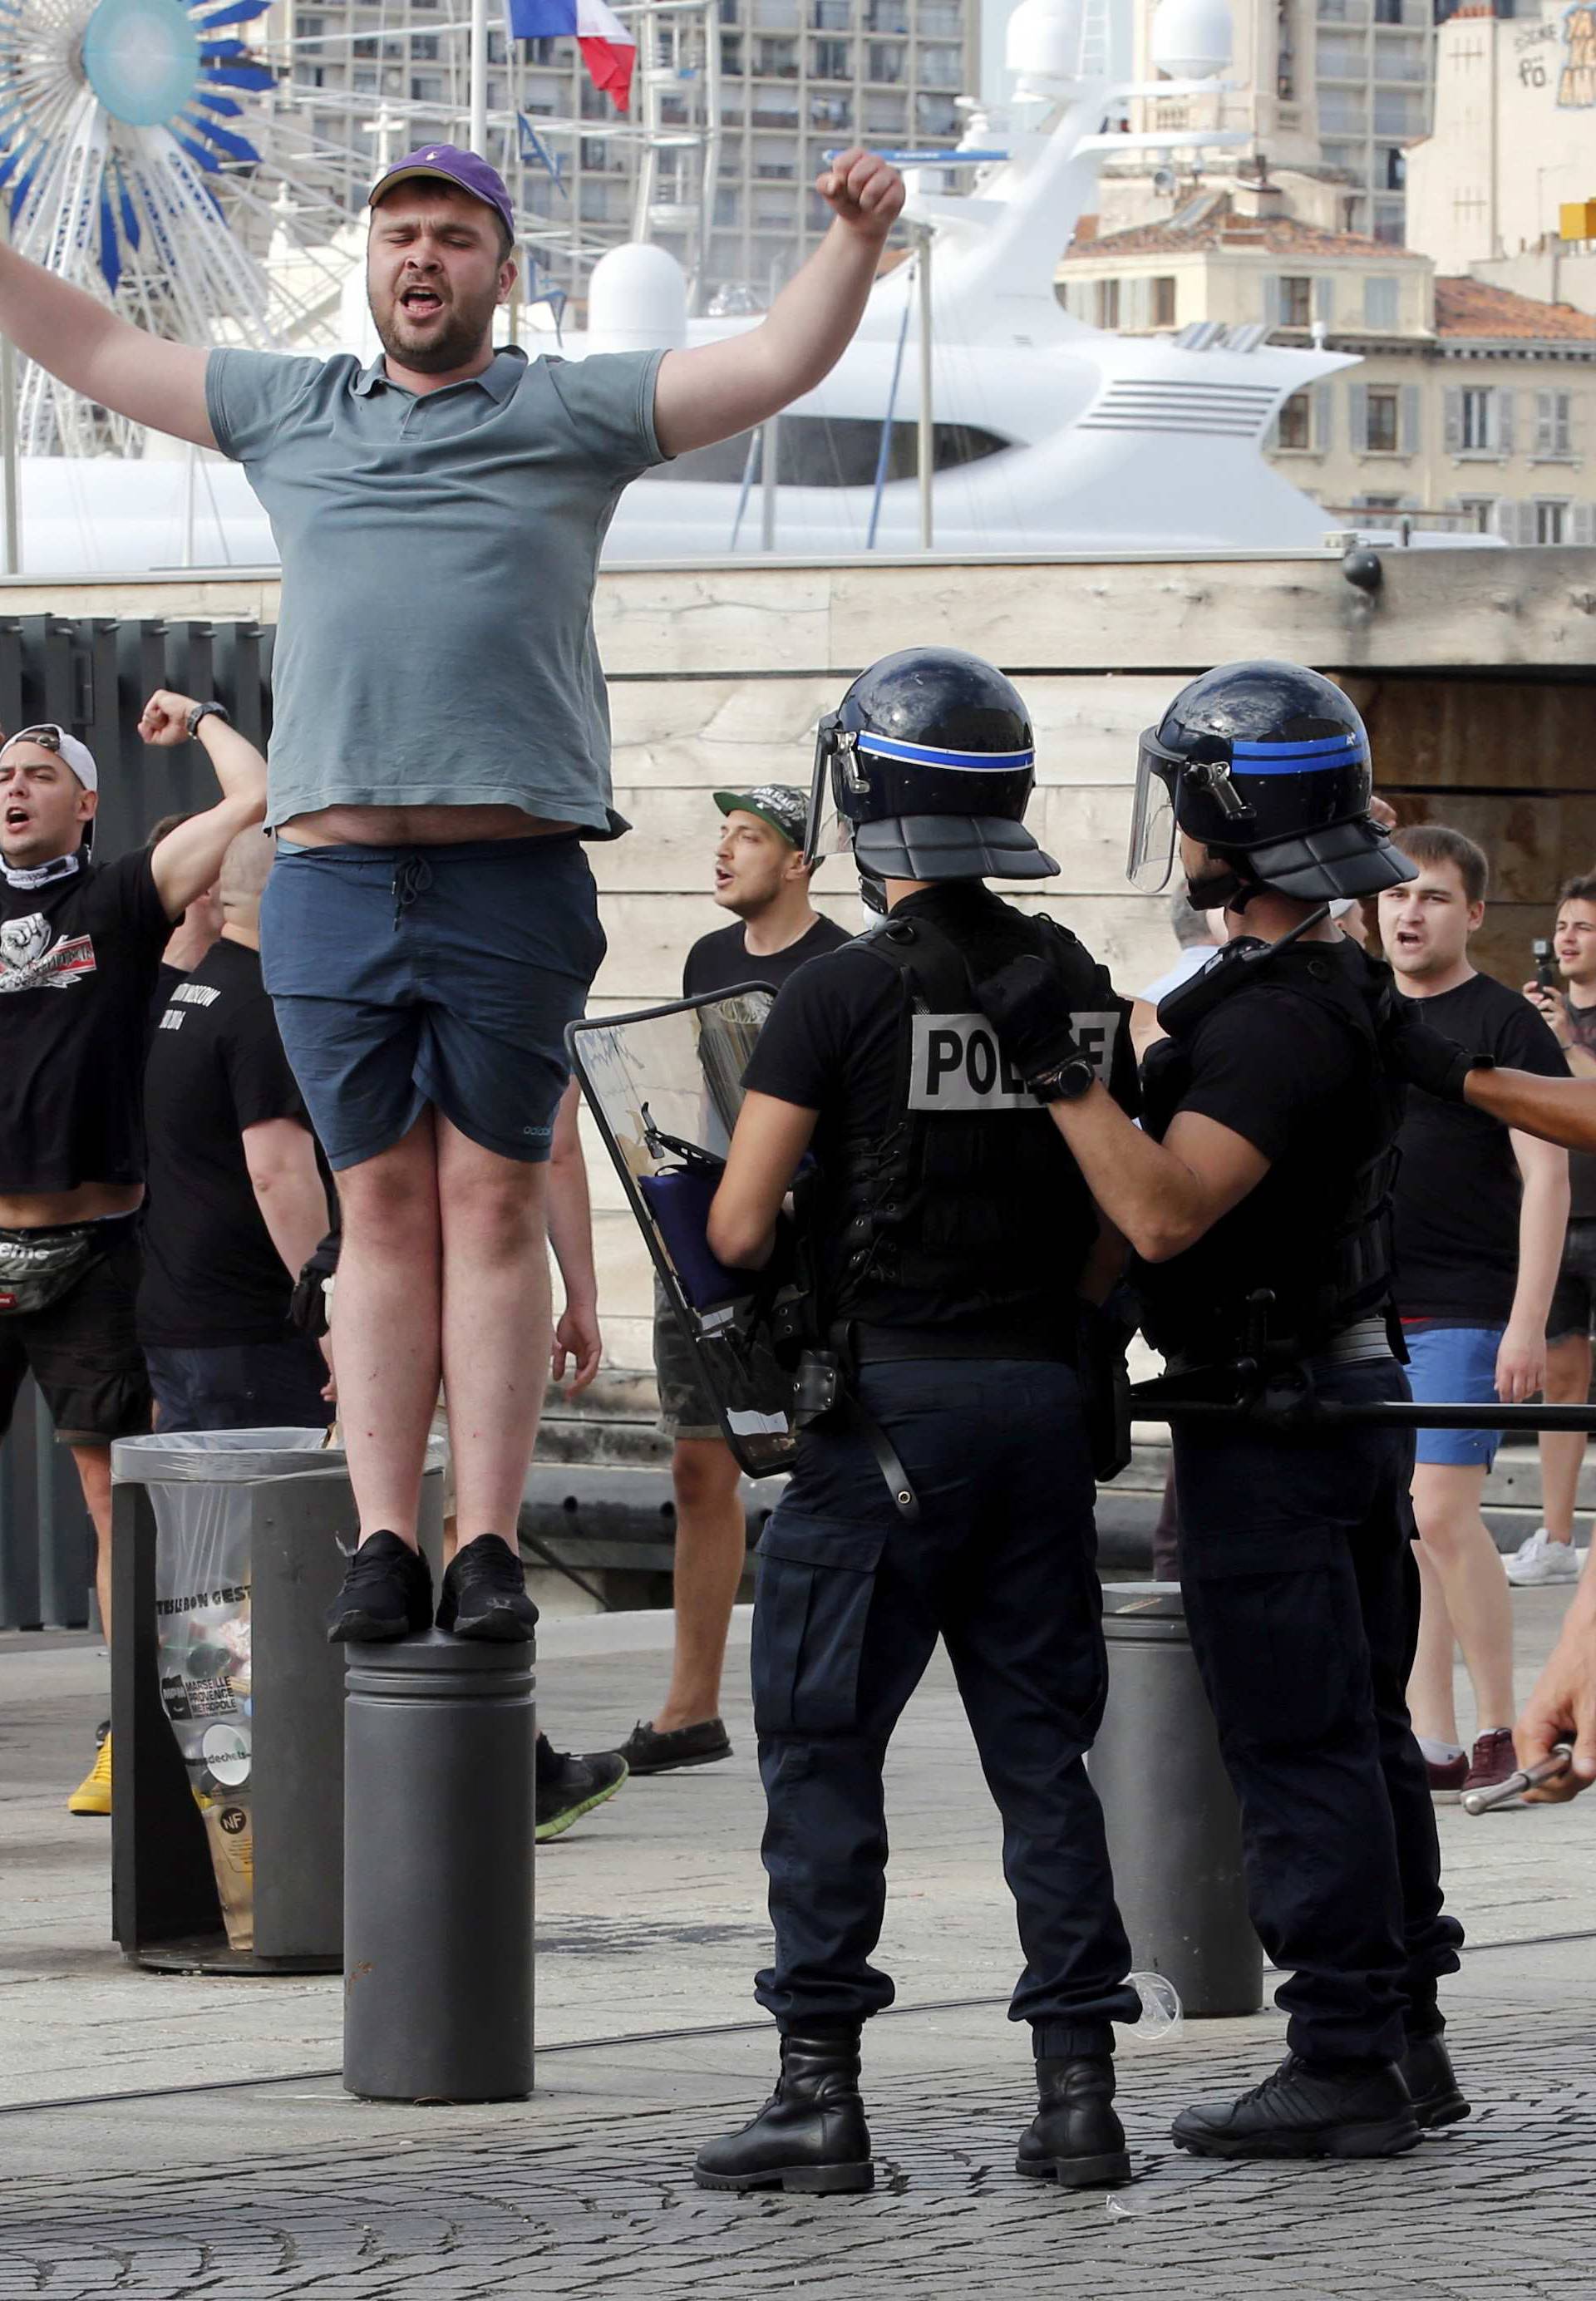 England fan taunts riot police ahead of England's EURO 2016 match in Marseille